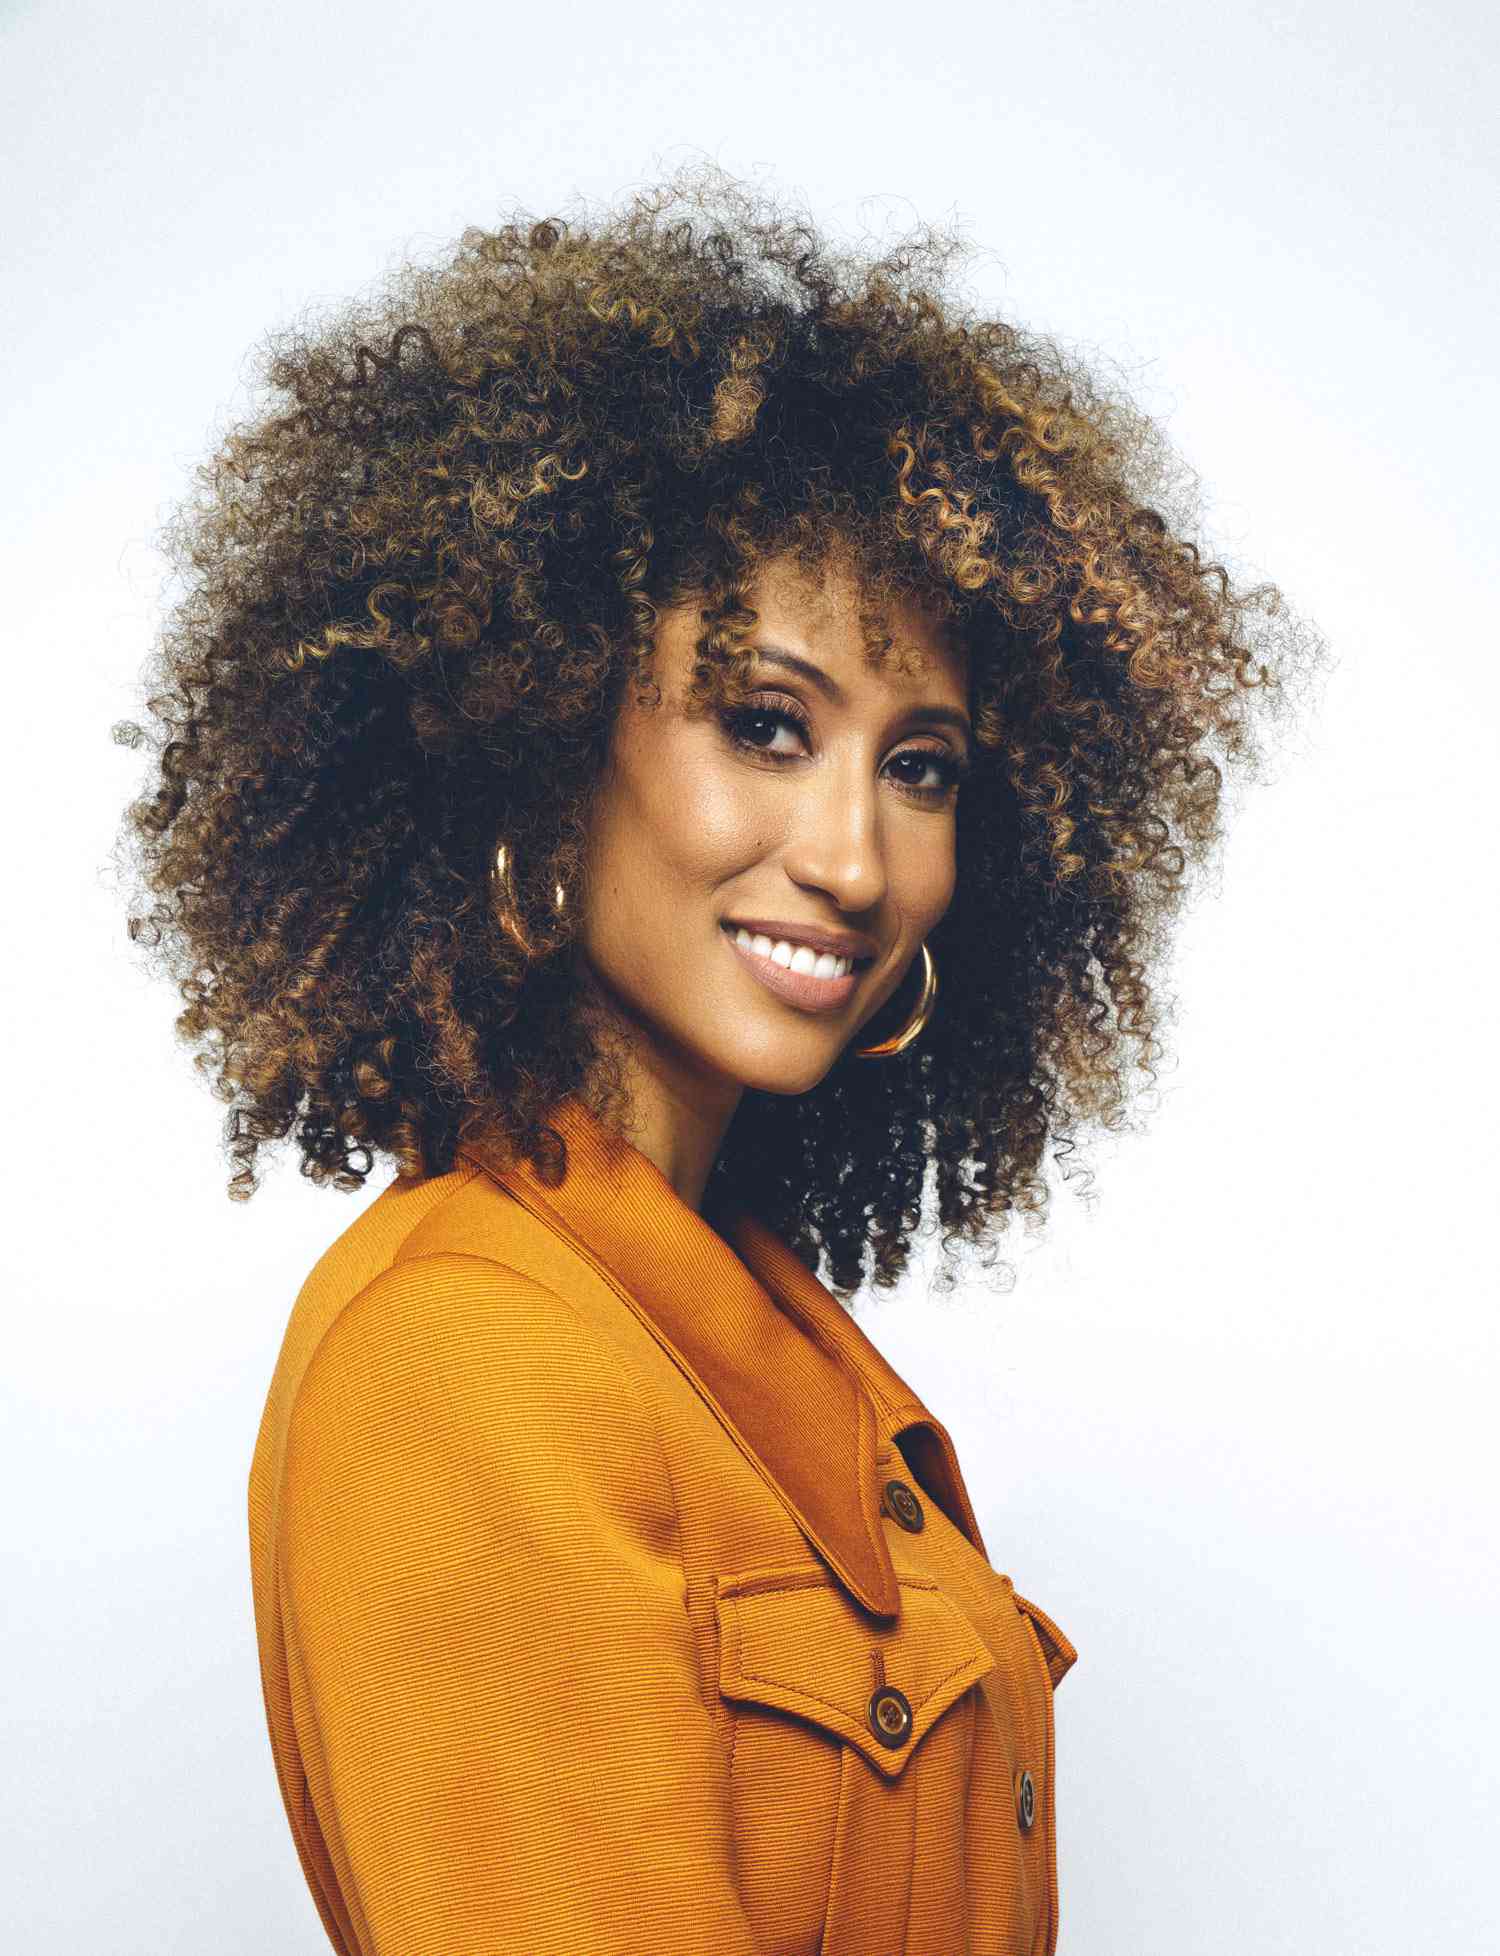 Elaine Welteroth Details the 'Visible' Impact of Racism in the Fa...